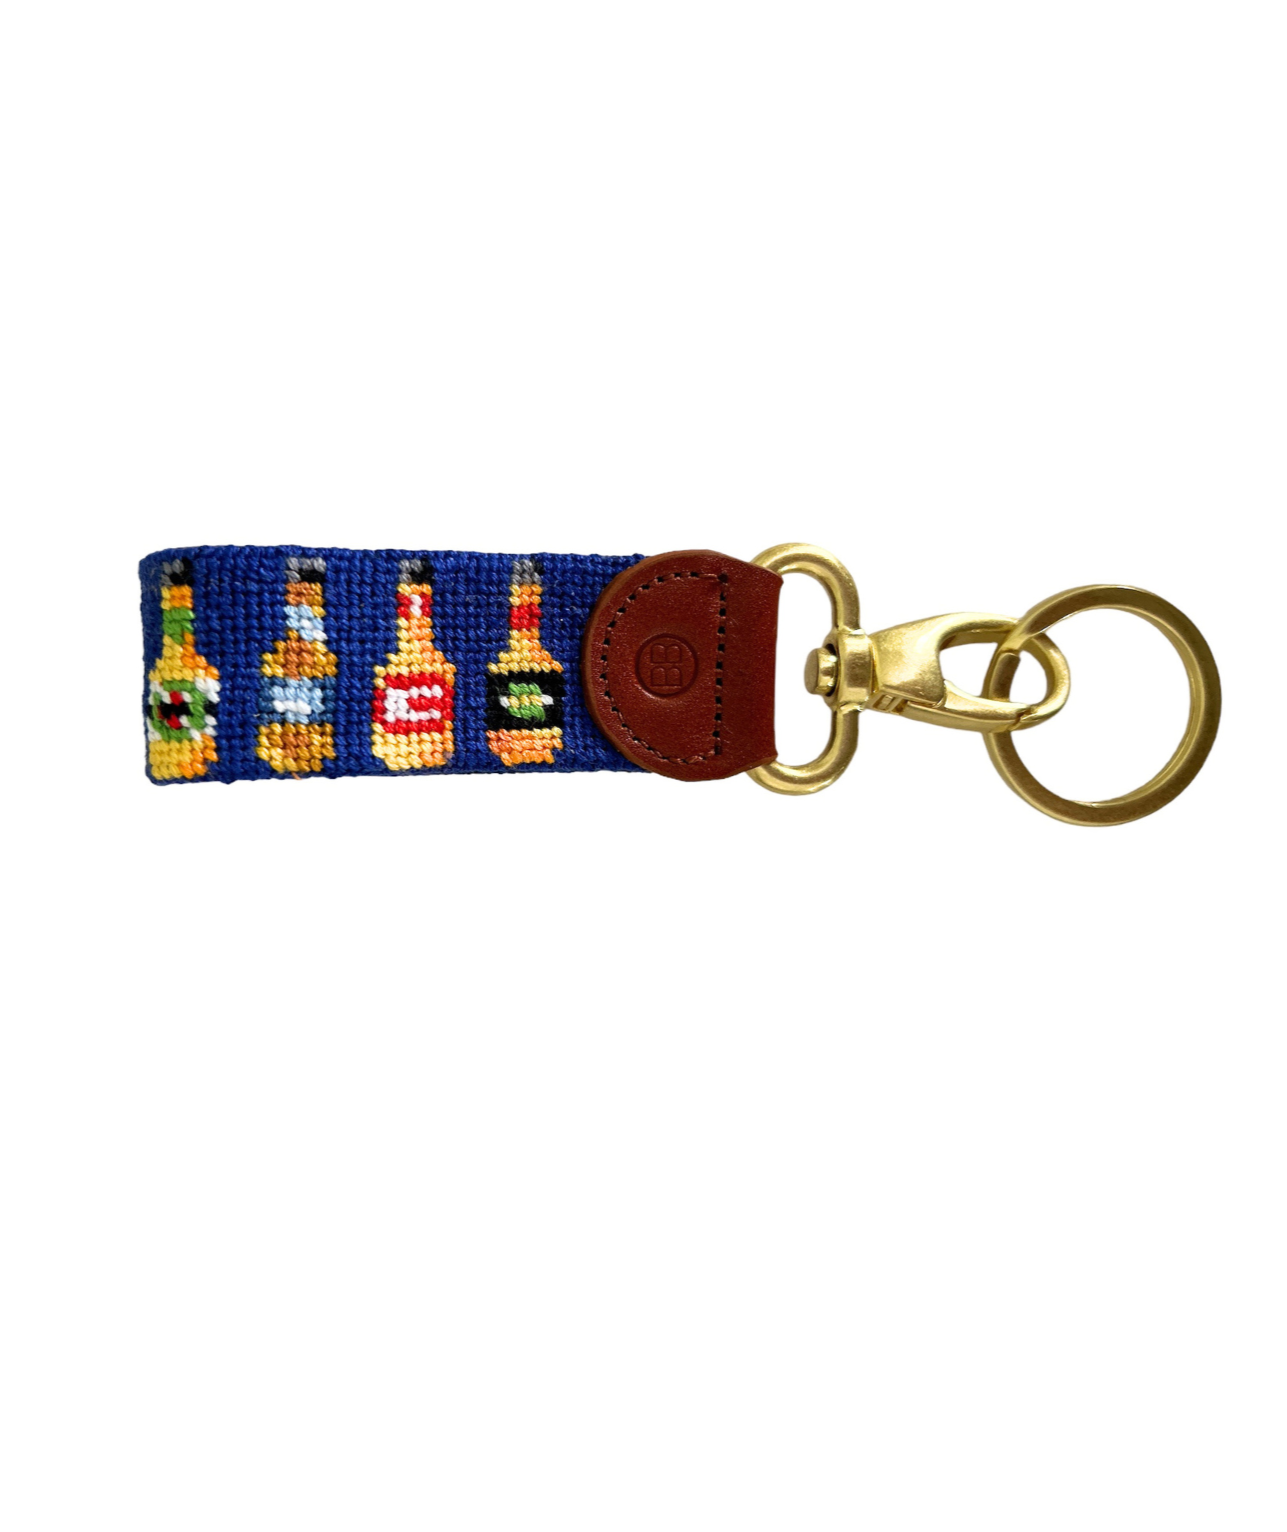 Needlepoint Key Fob Beer Bottle design with lobster clasp